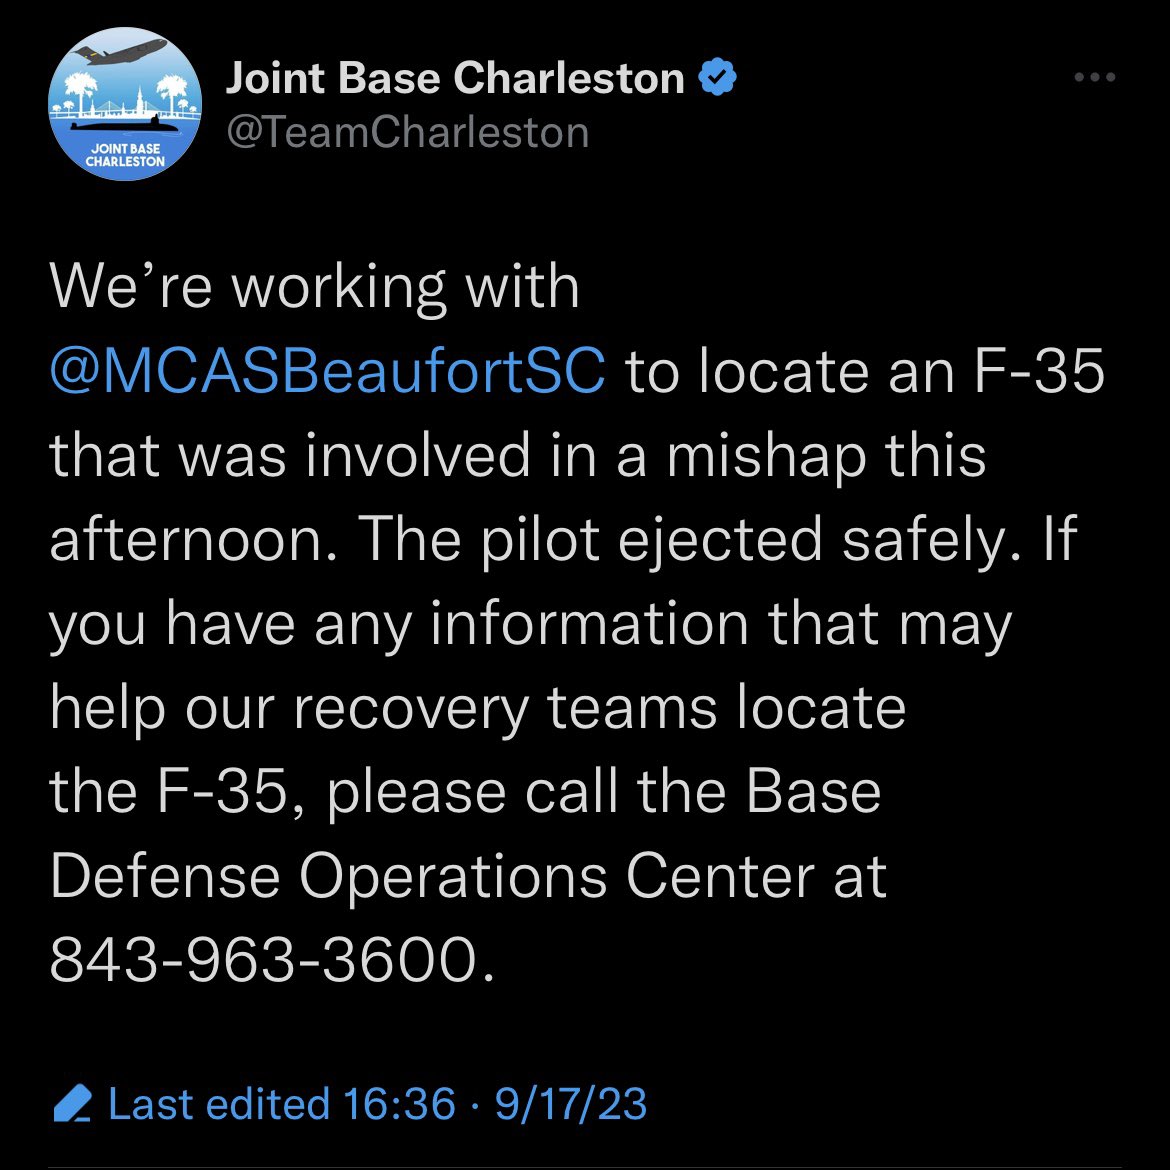 So our military lost a F-35 Jet yesterday and they are asking the public for help finding it?!